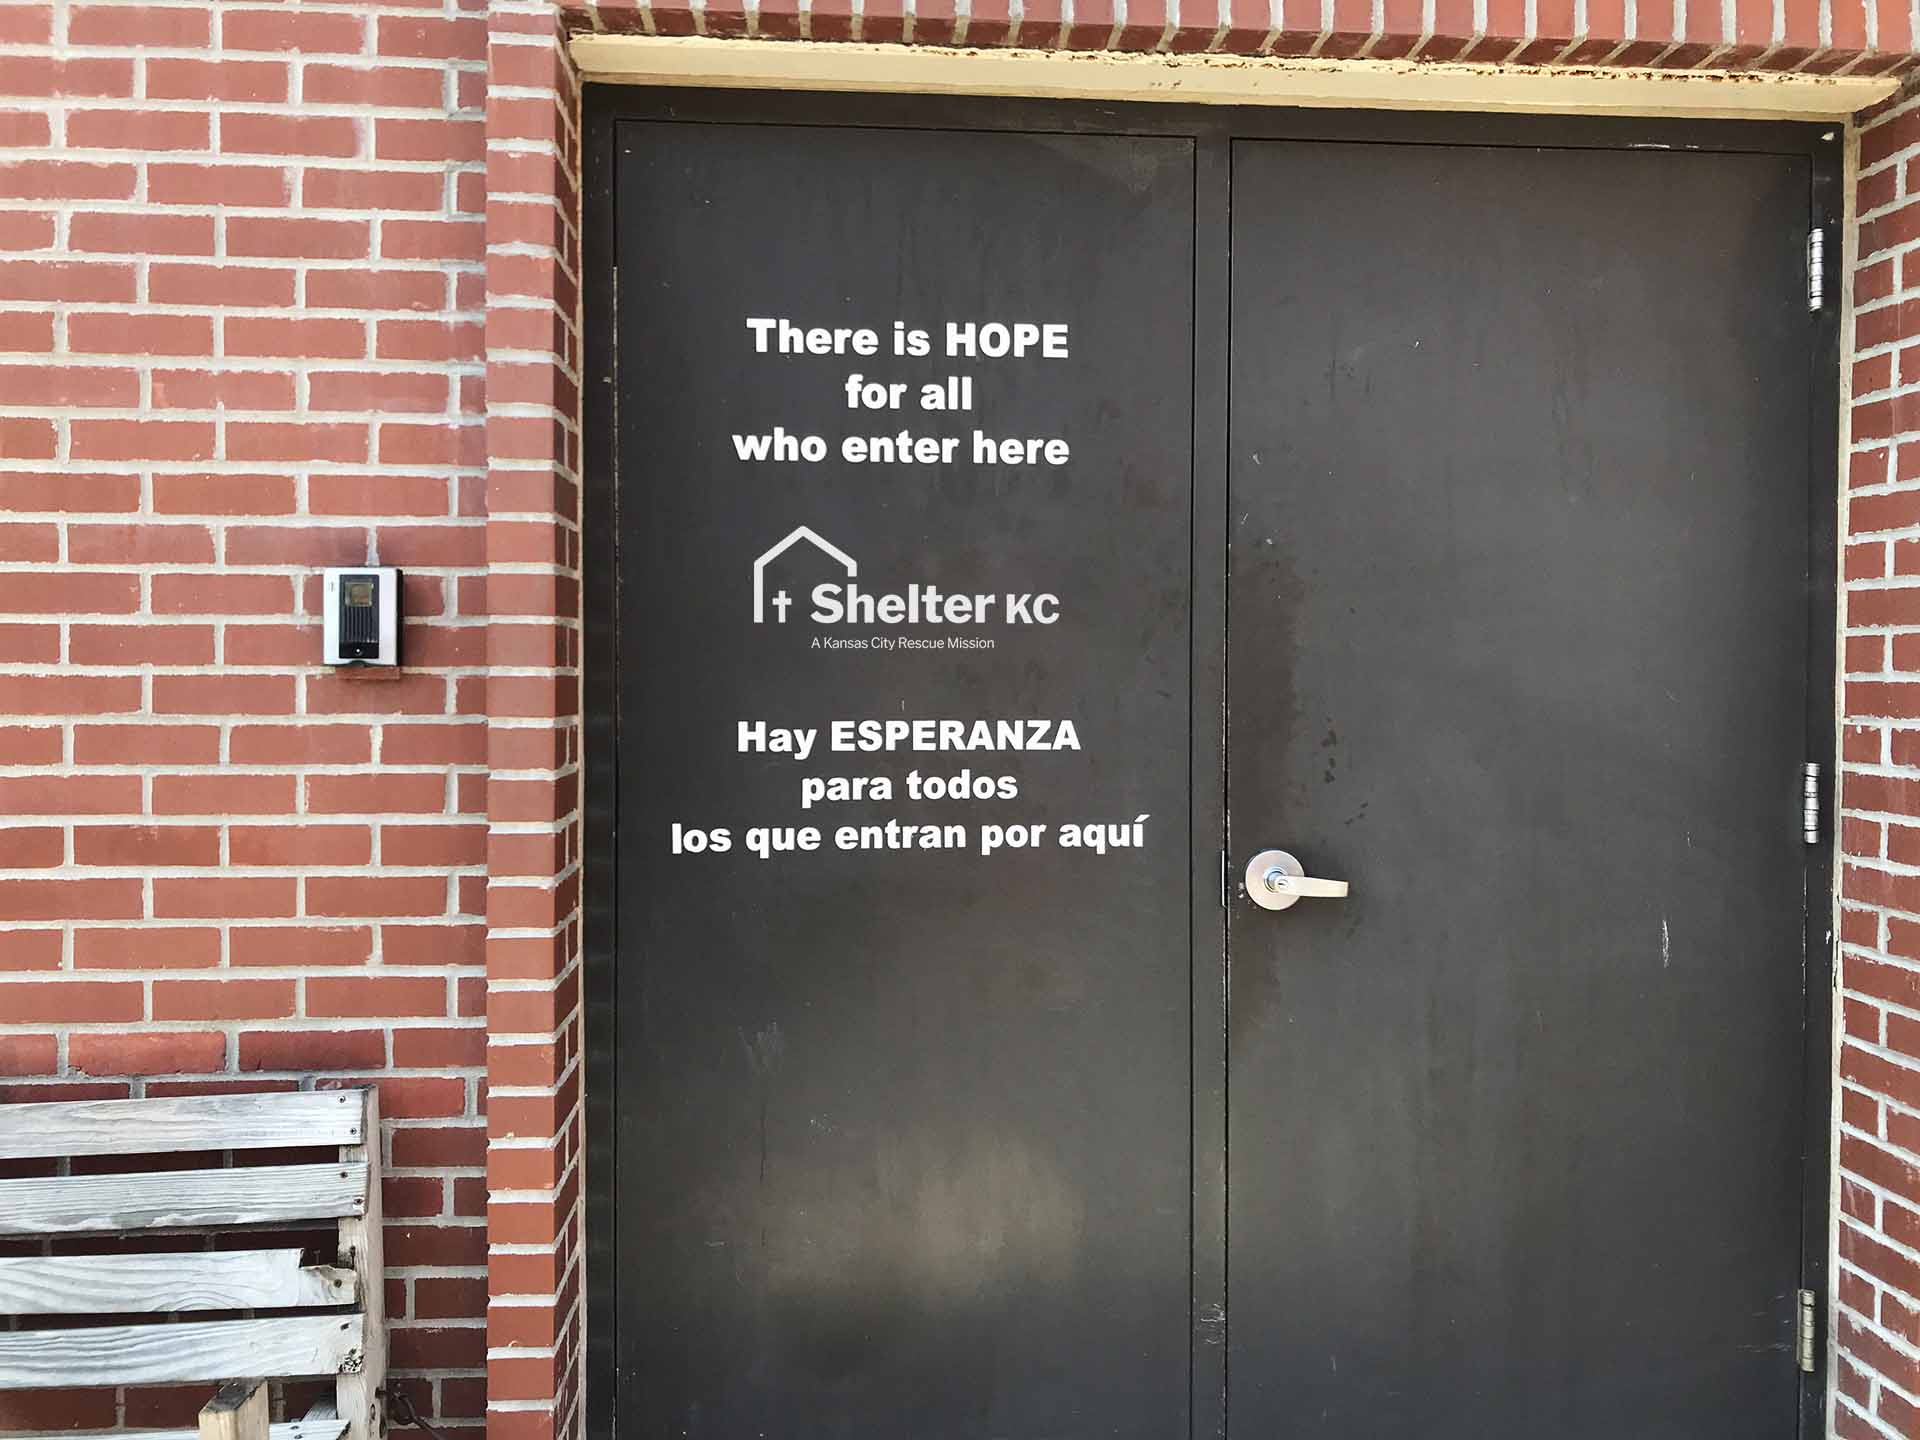 "There is HOPE for all who enter here" sign on the Shelter KC door